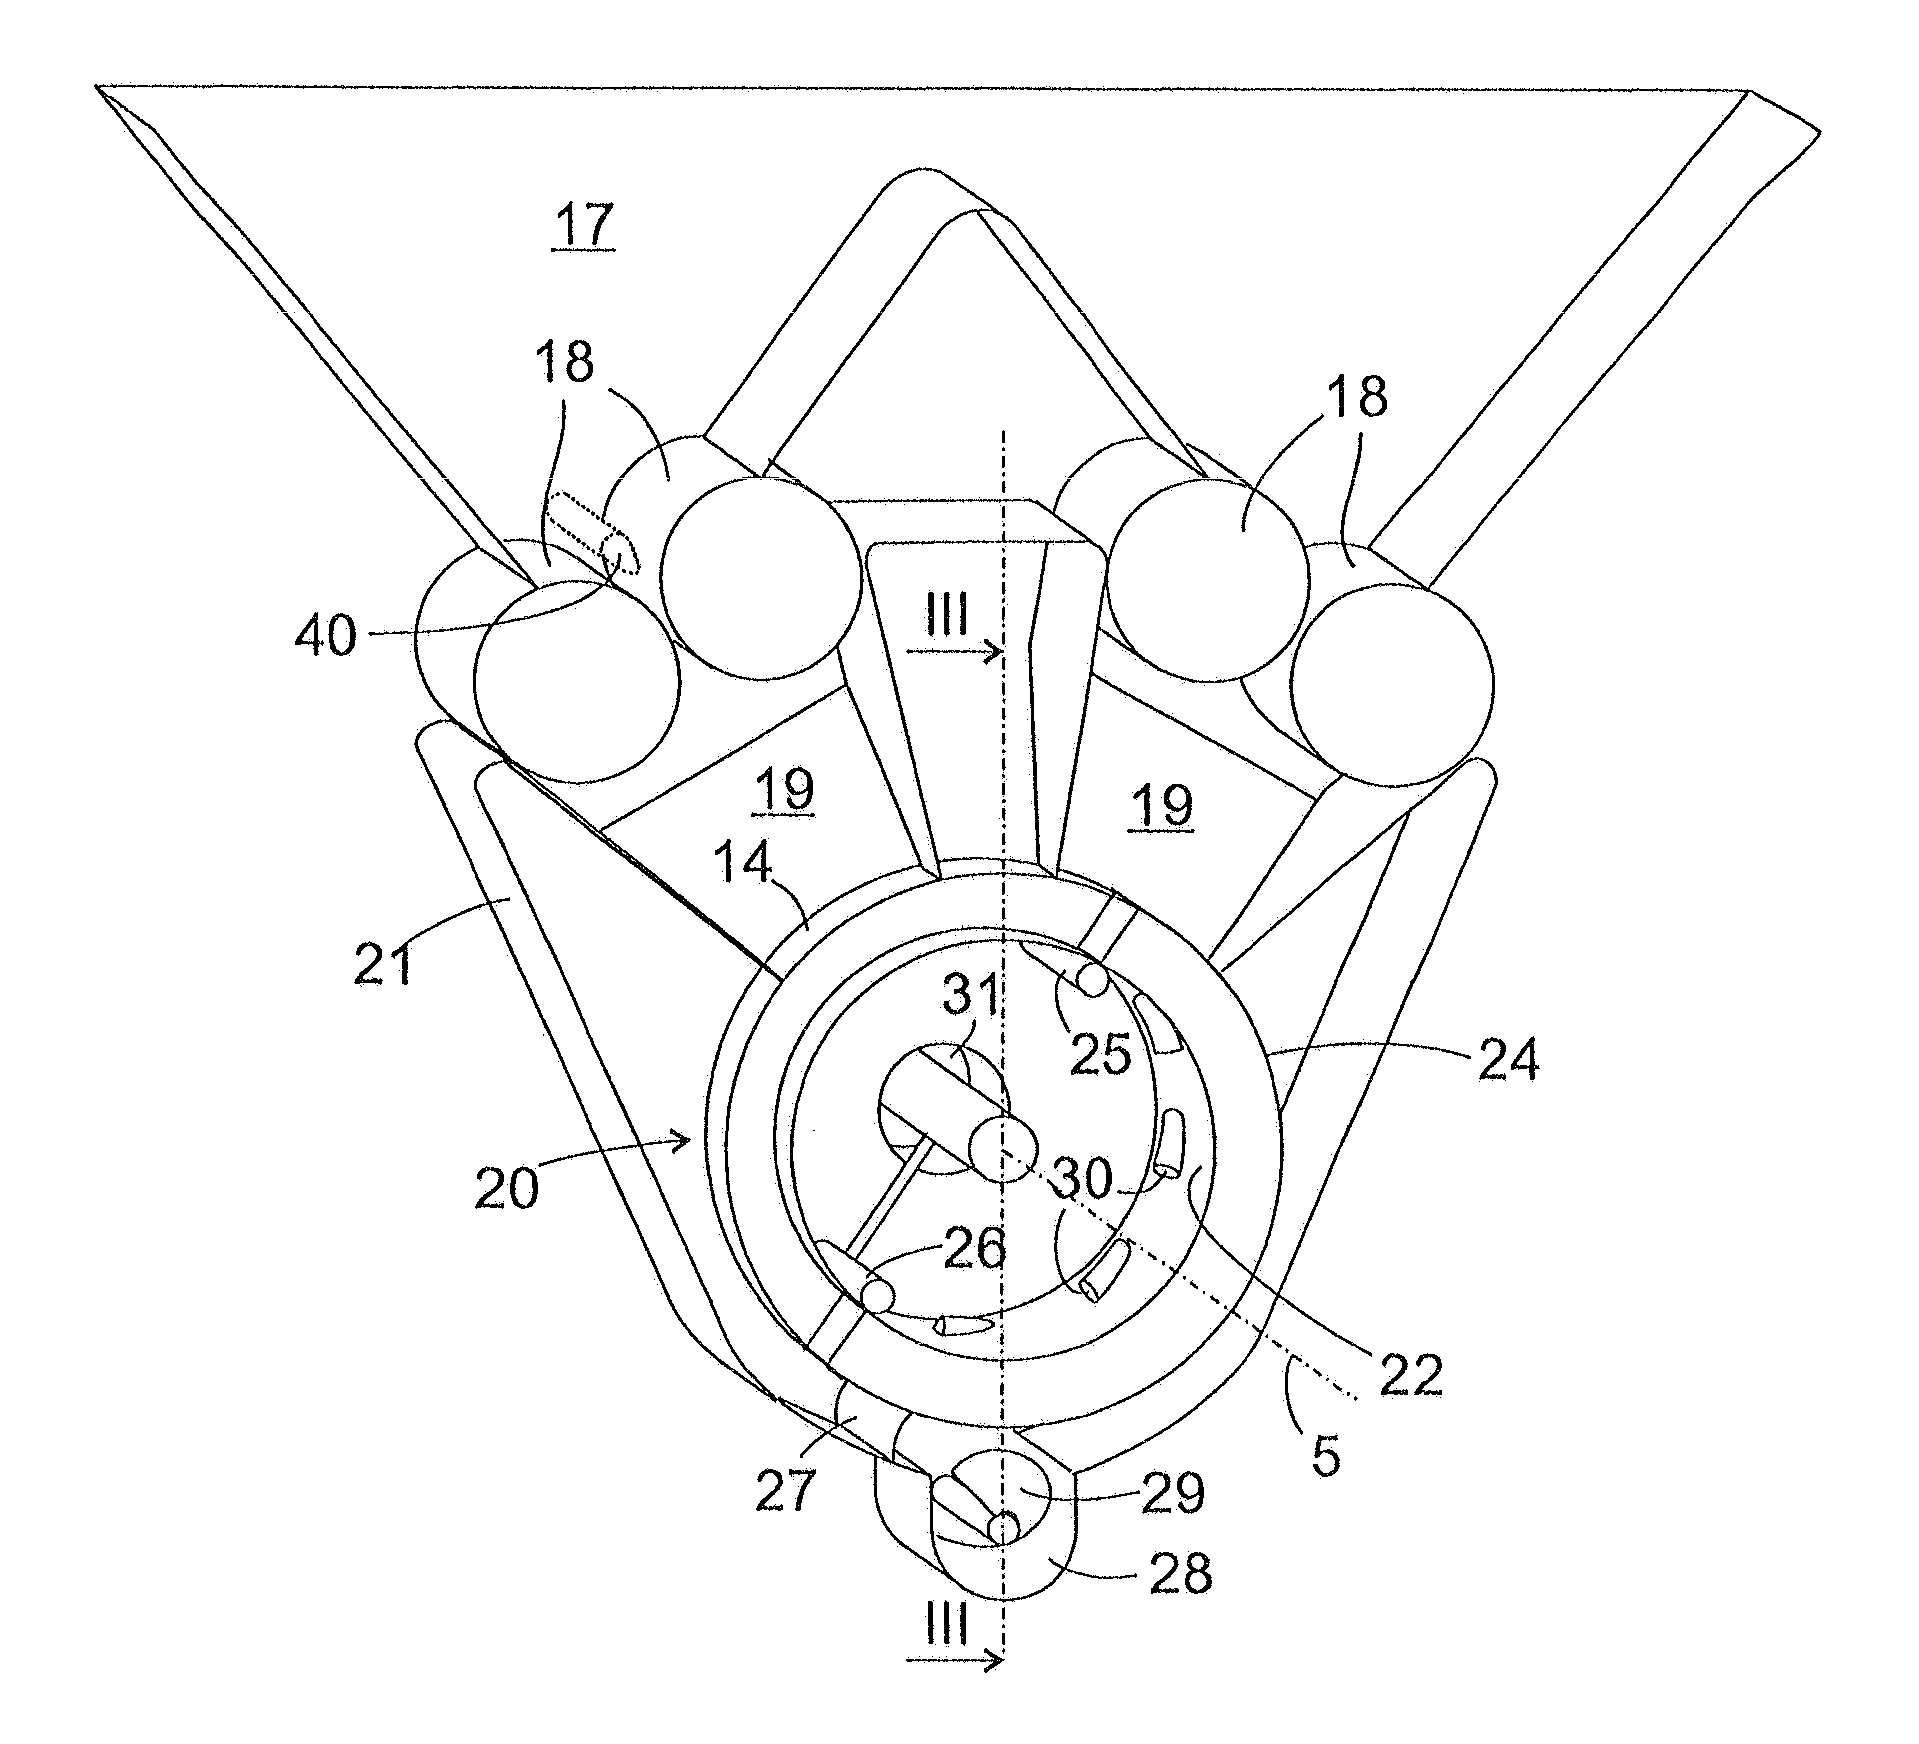 Thermochemical reactor for a self-propelled harvesting vehicle